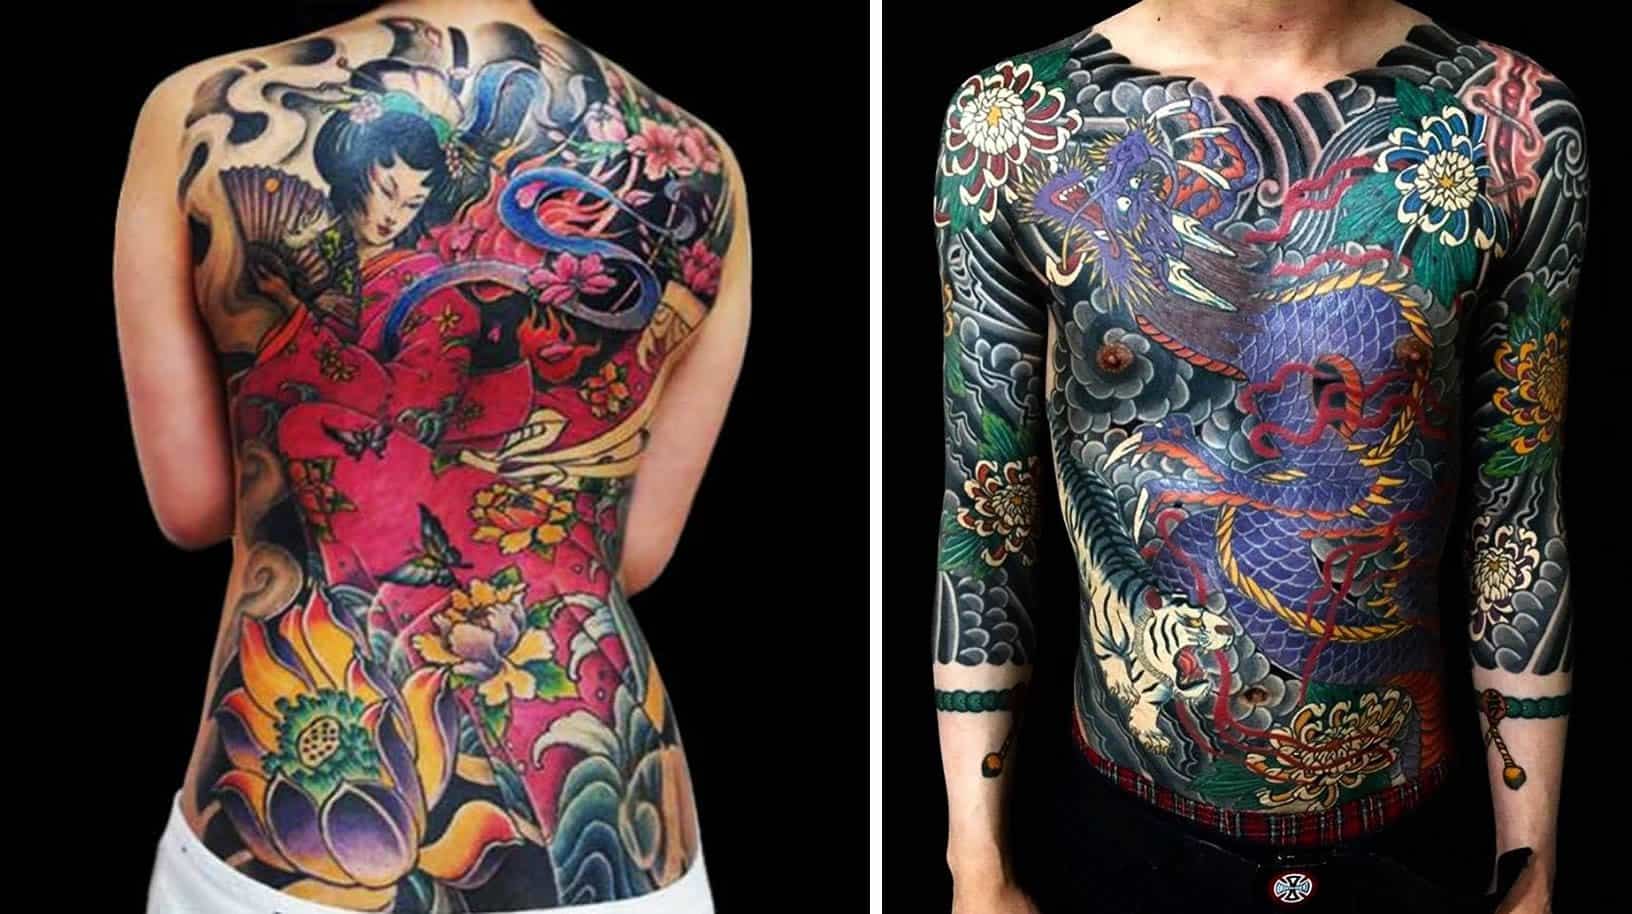 16 Fascinating Yakuza Tattoos and Their Hidden Symbolic Meaning